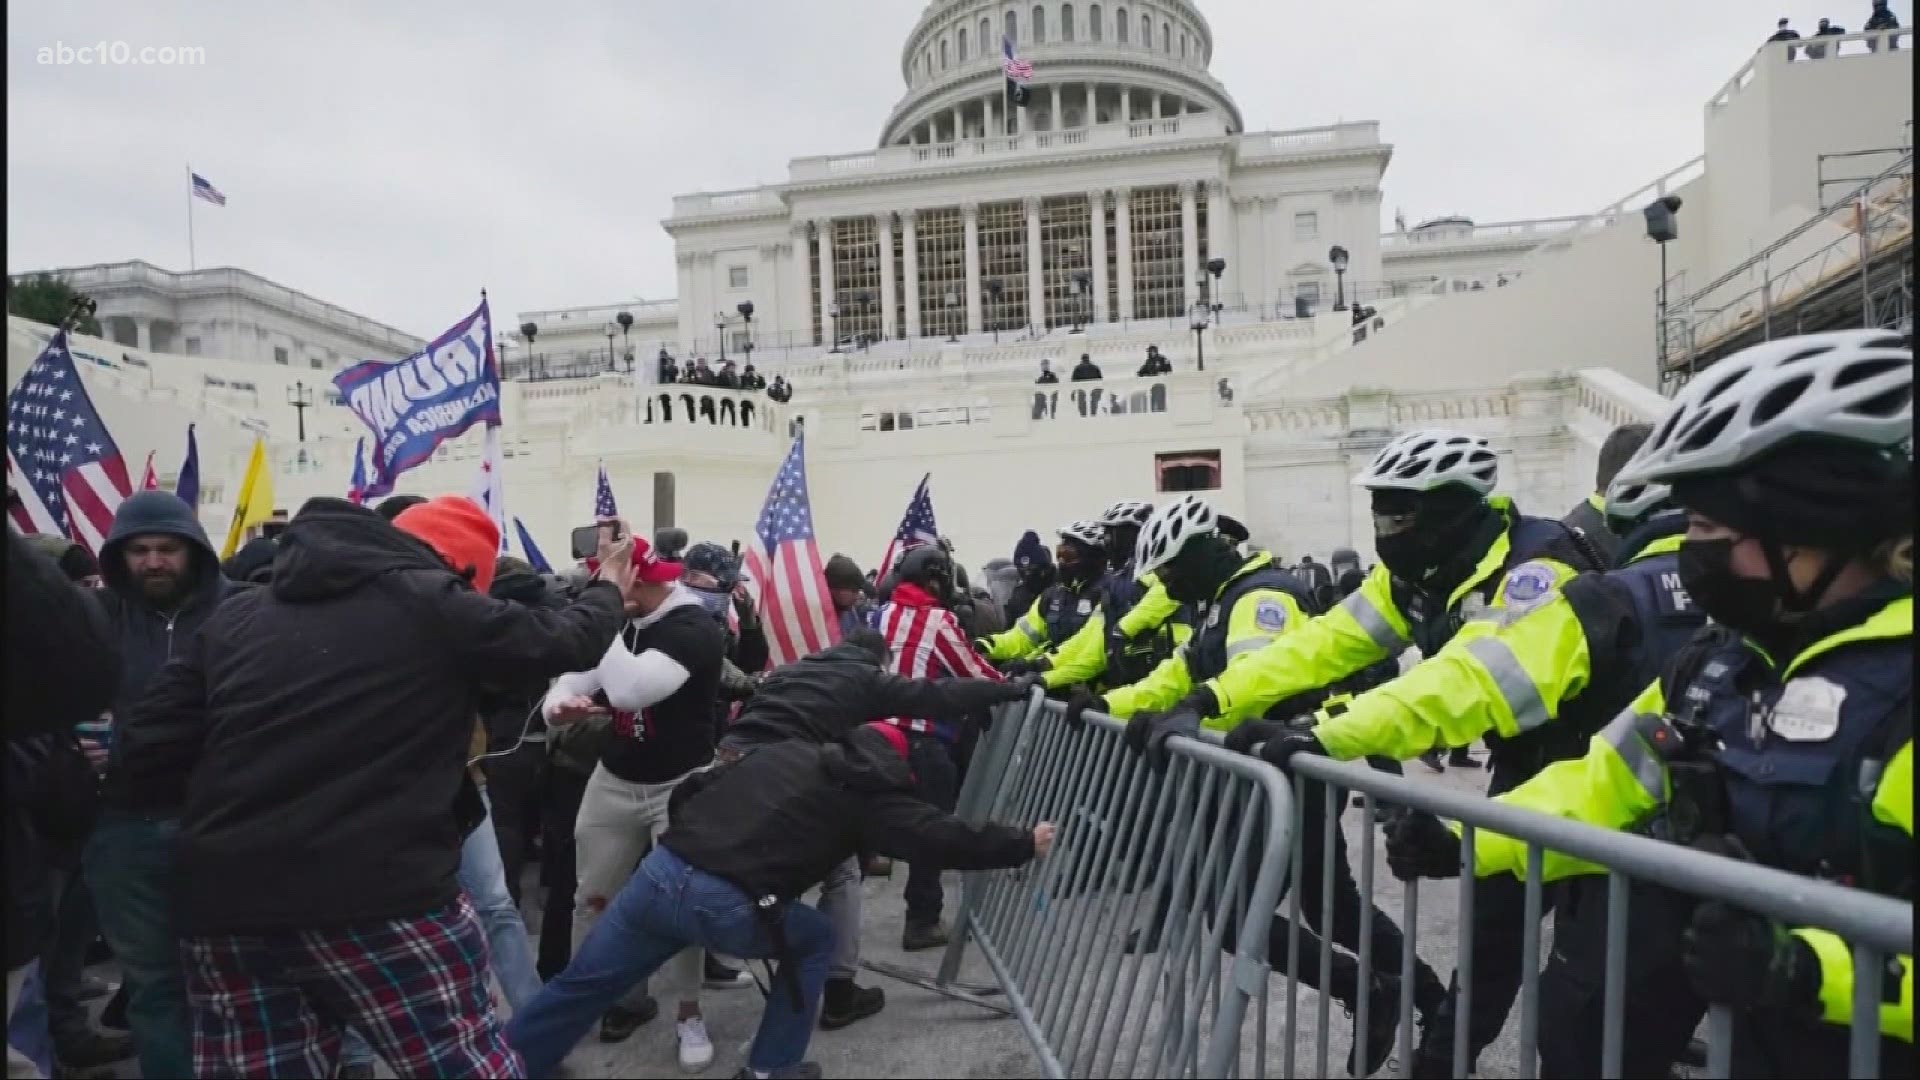 The FBI is warning of planned armed protests in all 50 states leading up to Inauguration Day. Experts say right-leaning extremist groups like Proud Boys are joining.